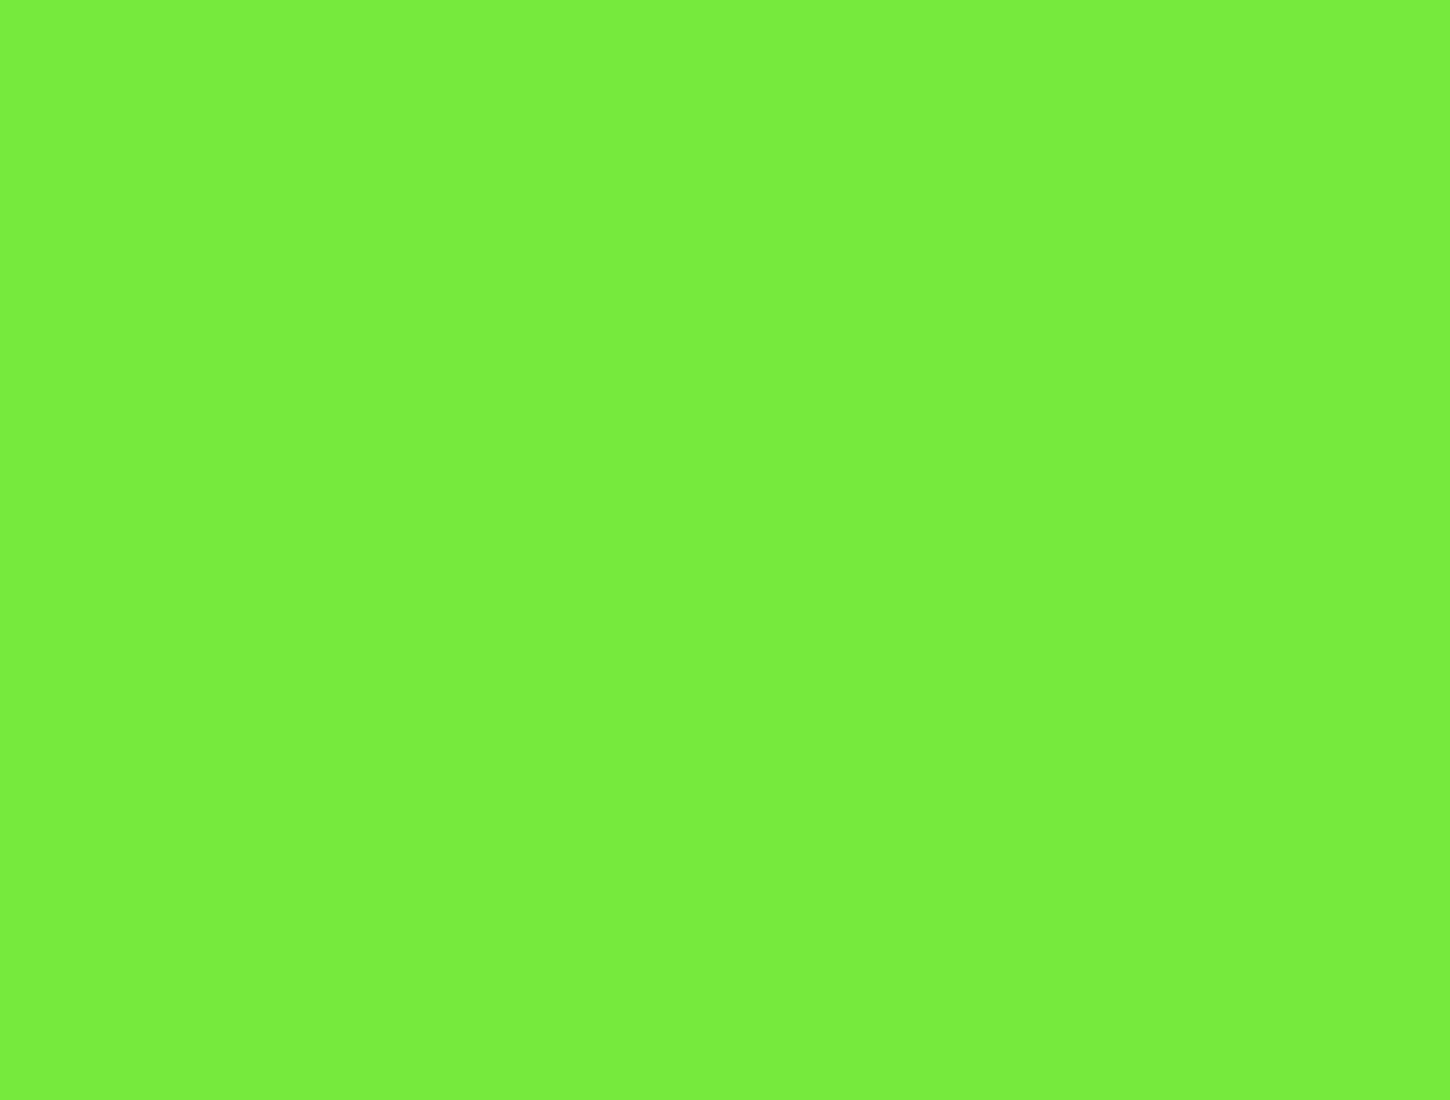 Lime green background picture by designed2shop photobucket   27202